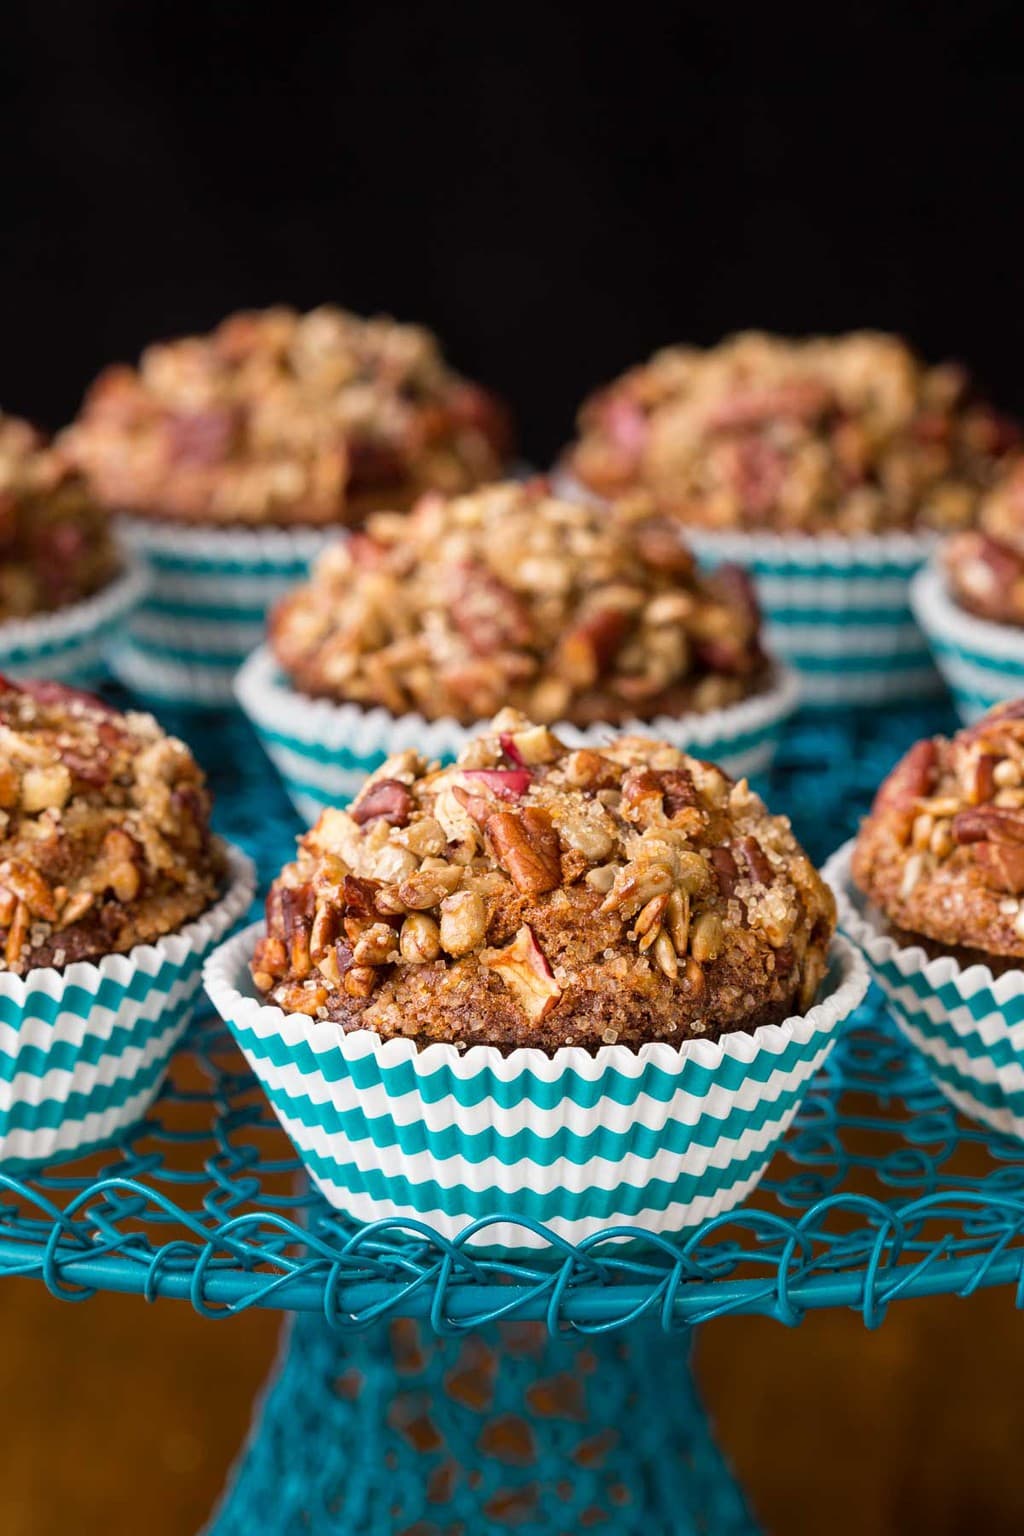 Photo of a turquoise wire cake stand filled with Candied Pecan Morning Glory Muffins in turquoise and white striped muffin cups.